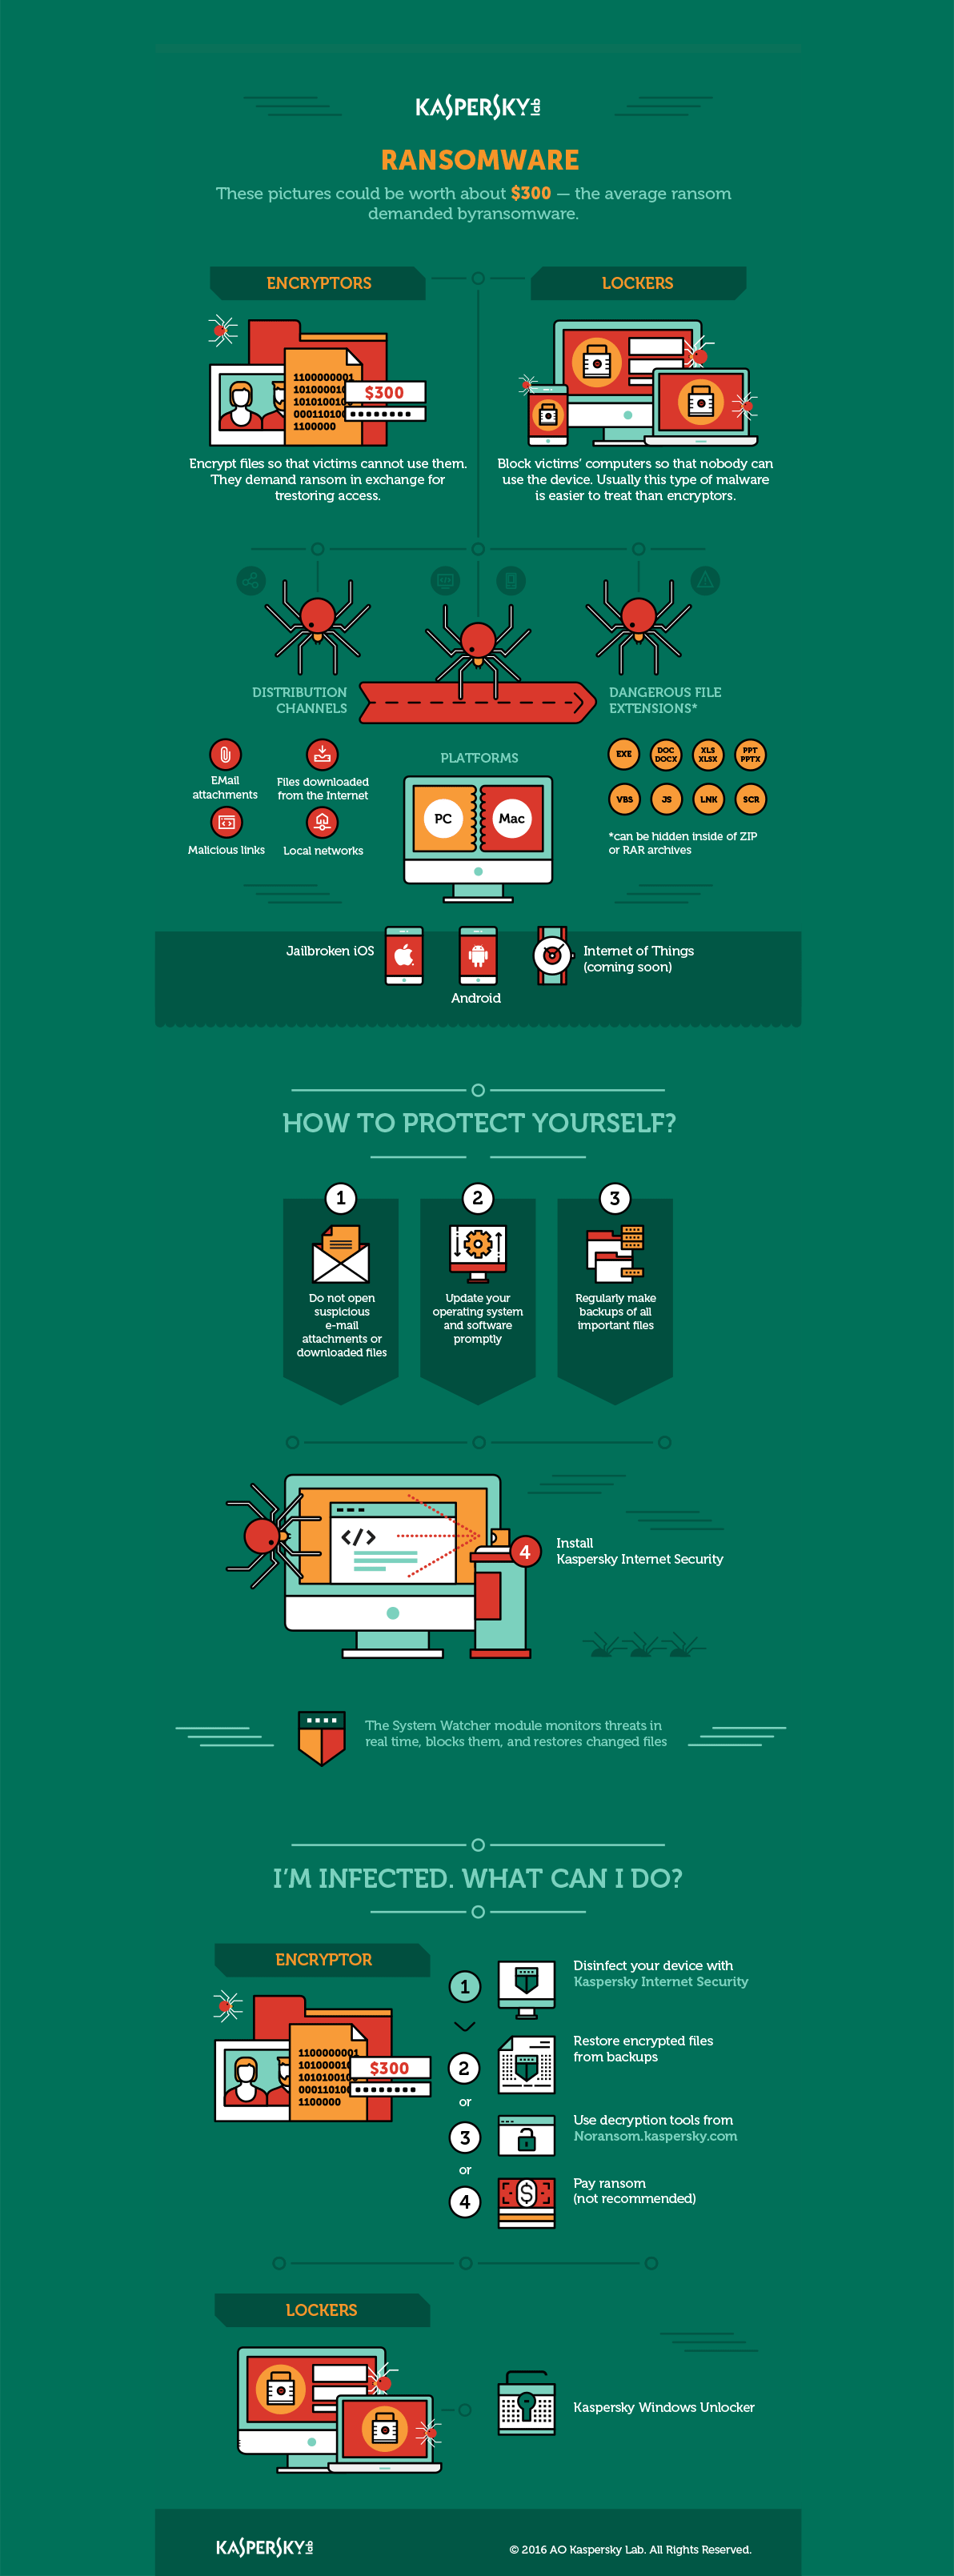 Infographic about ransomware